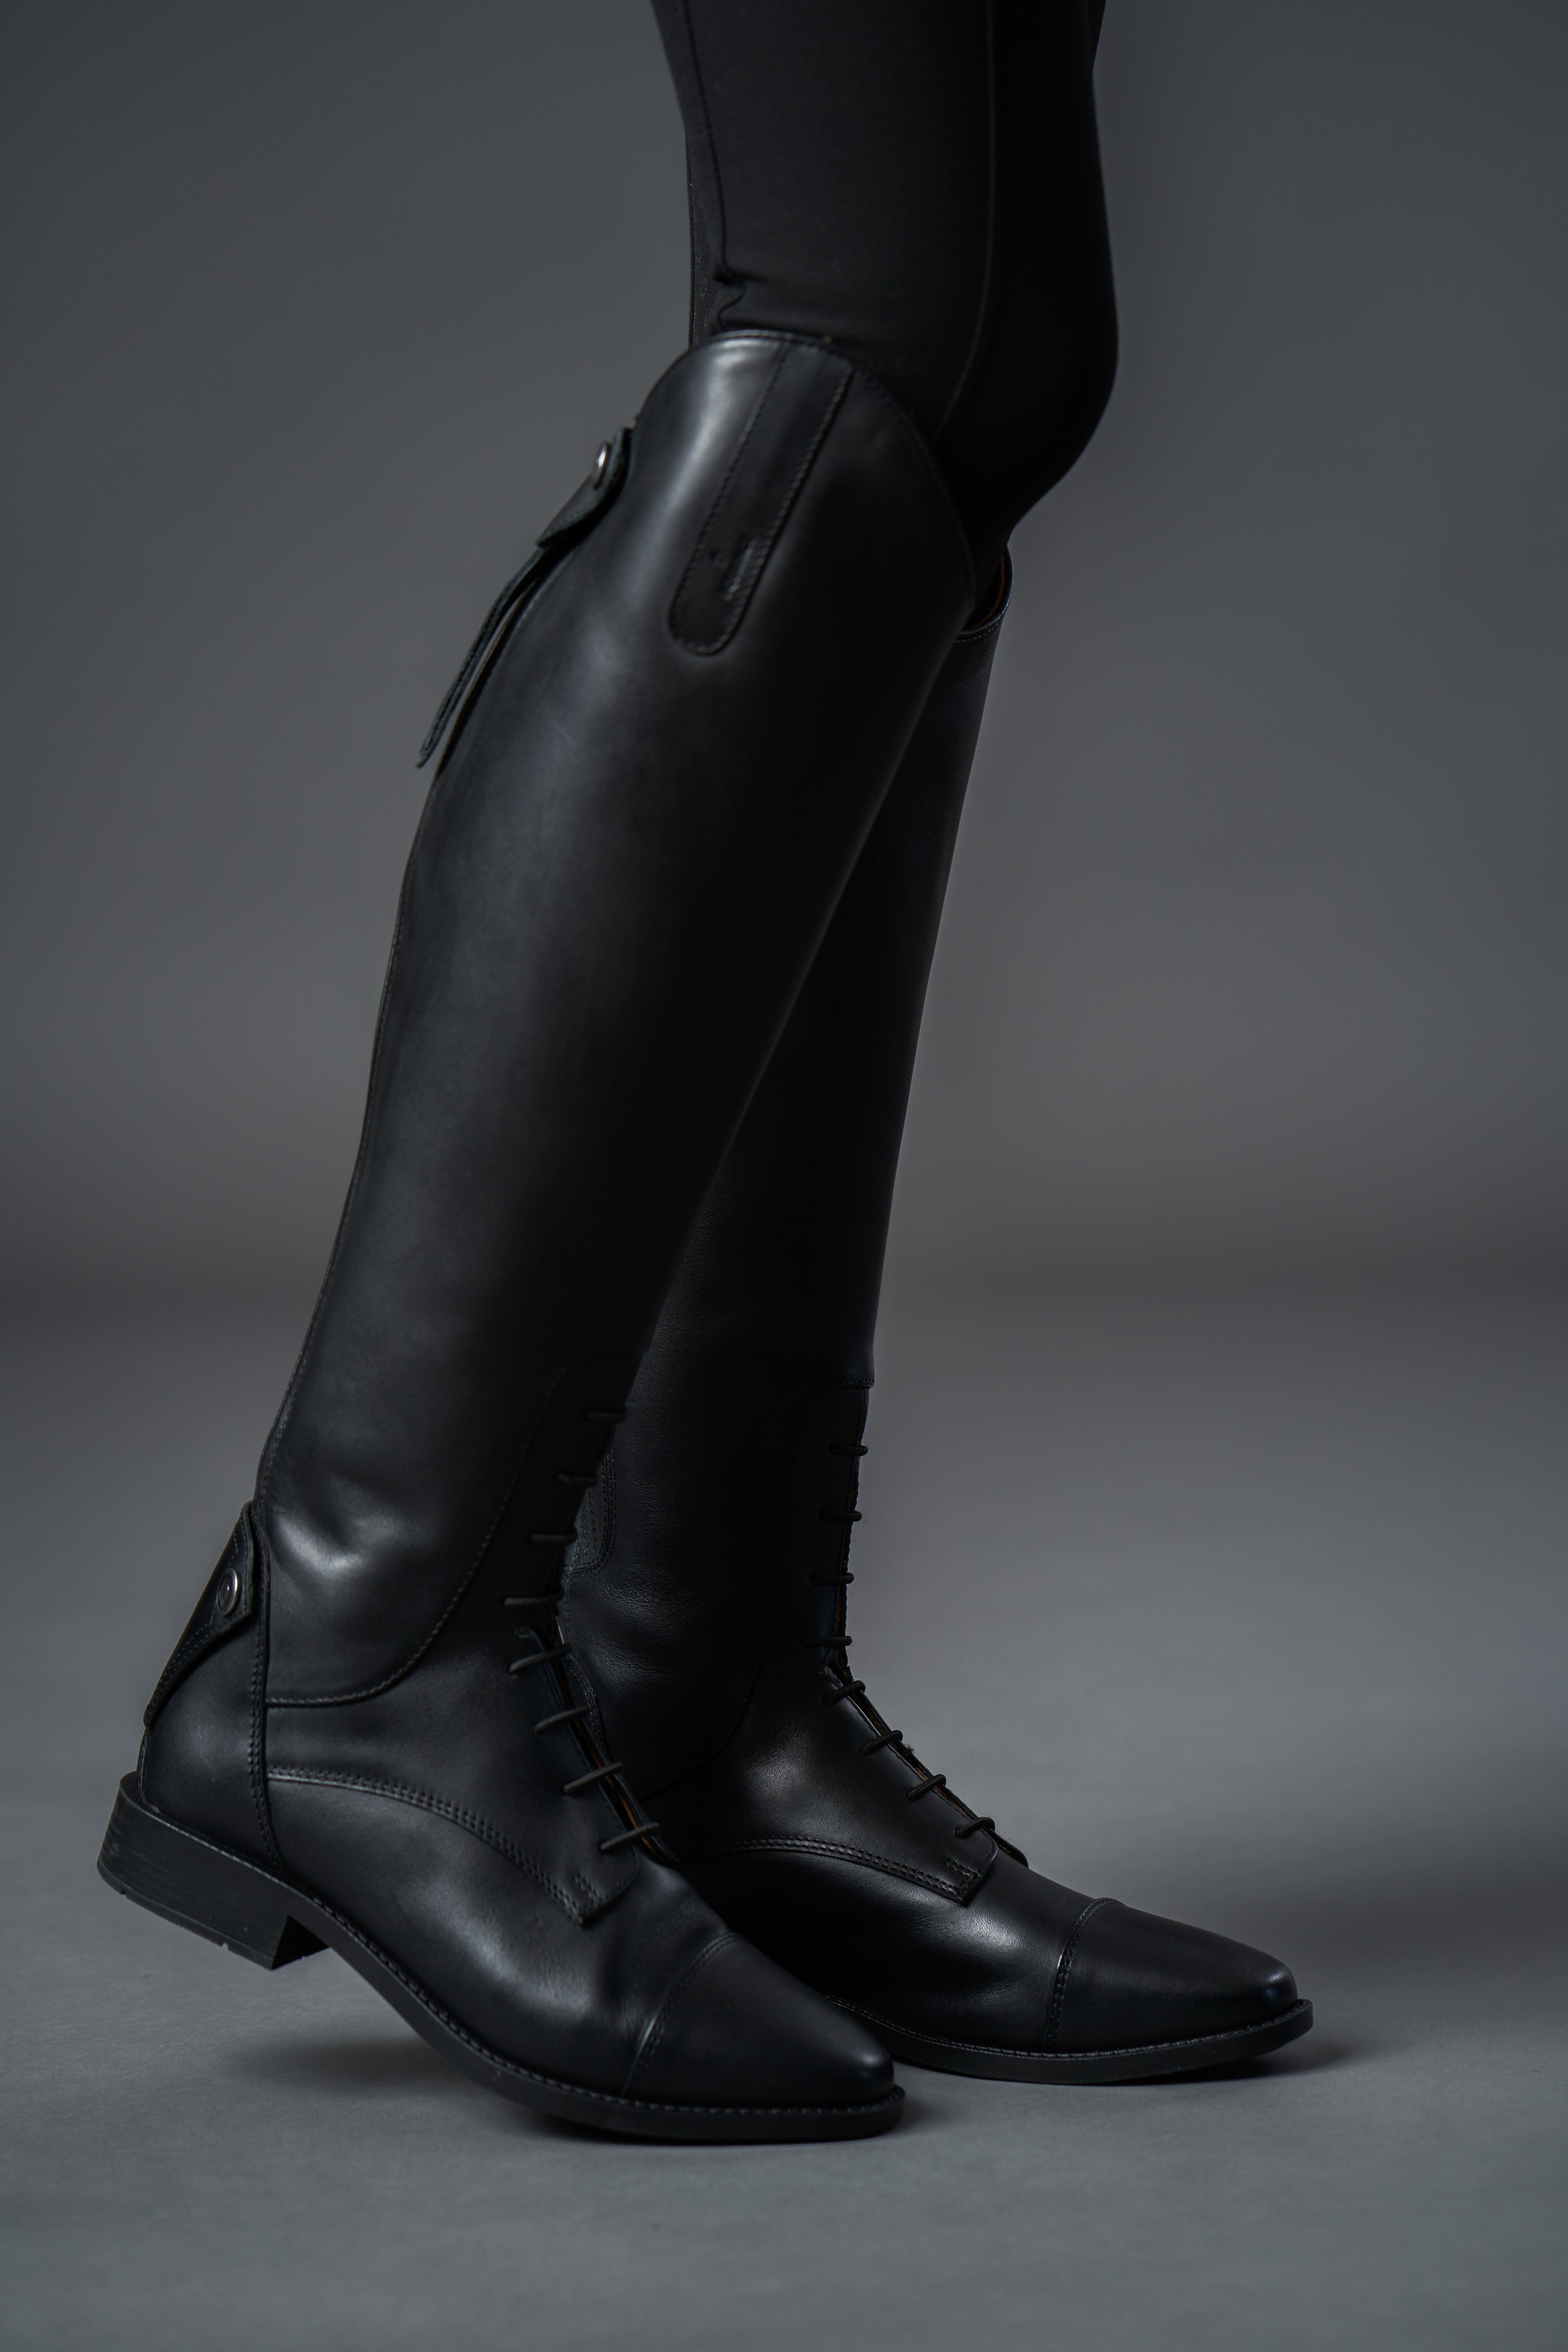 Equipage Megan W Riding Boots - Black (37)